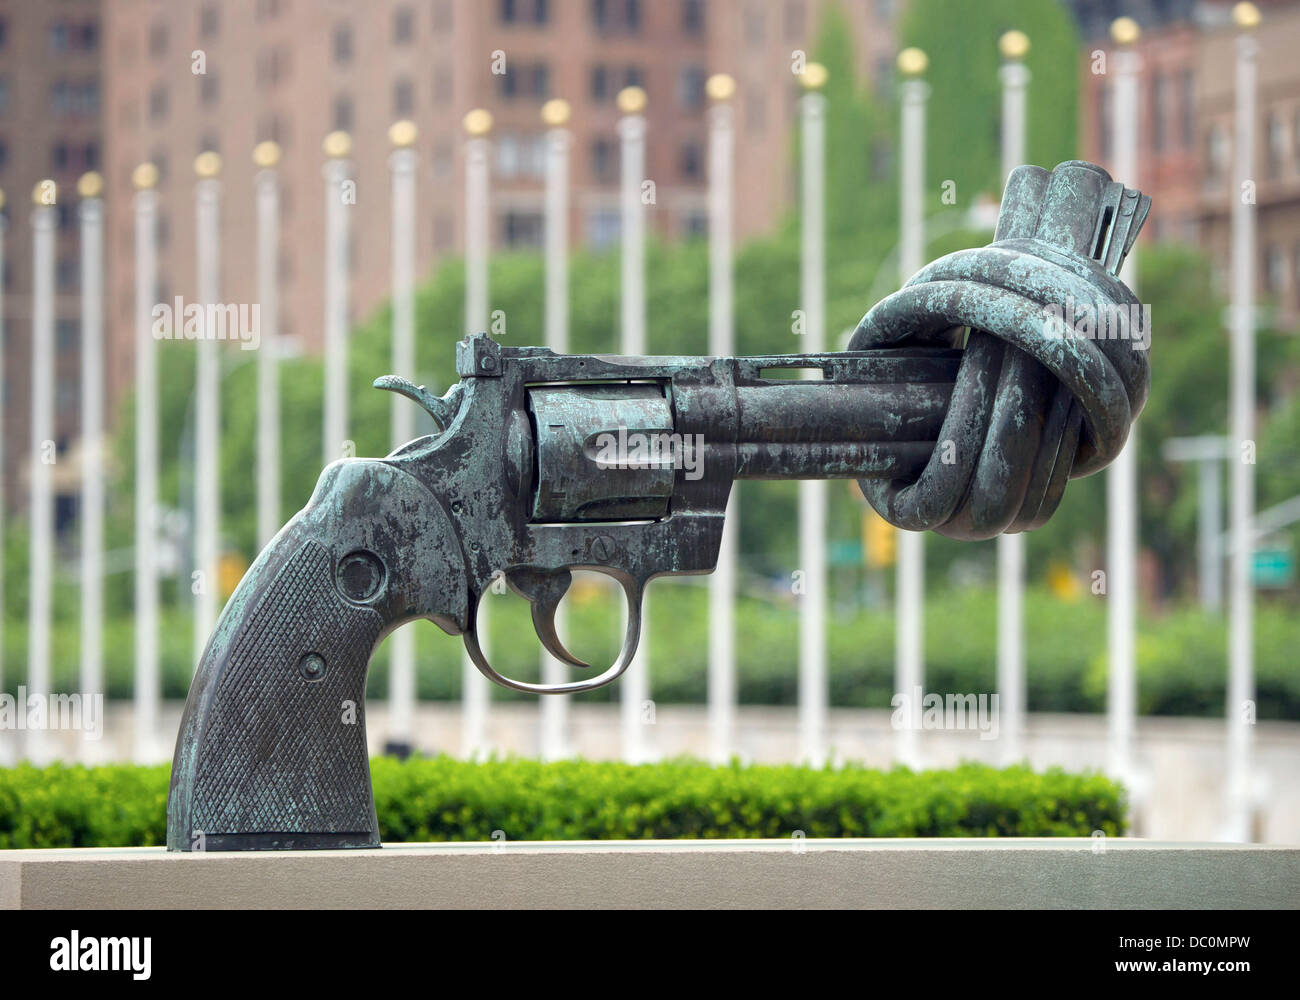 The sculpture "Non Violence" also known as "The Knotted Gun" by Swedish artist Carl Fredrik Reutersward sits outside of the United Nations (UN) in New York City, New York, USA, 03 June 2013. The scultpure was a gift from Luxembourg to the UN in 1988. Photo: TIM BRAKEMEIER Stock Photo